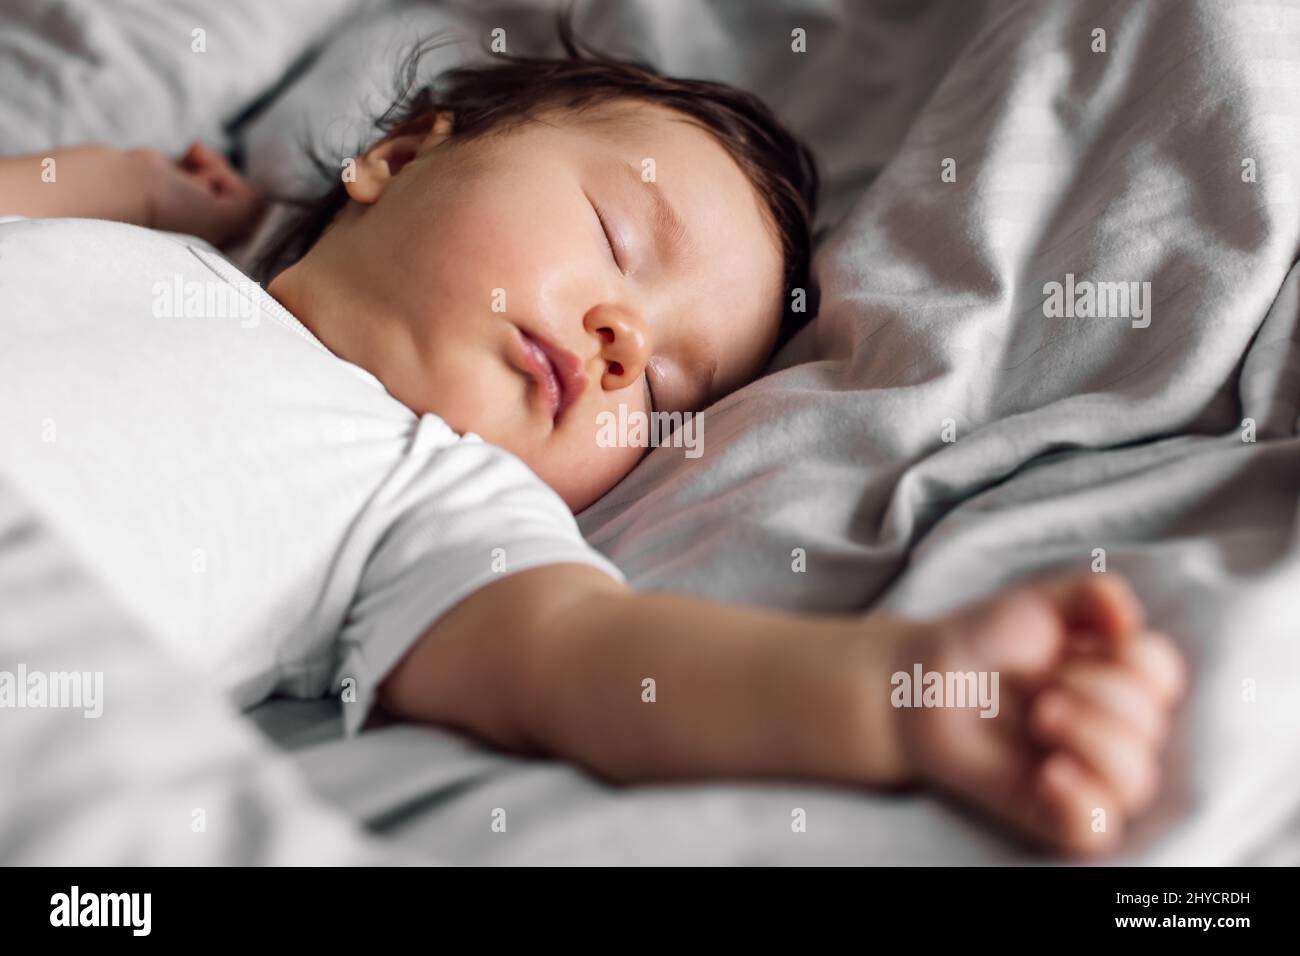 Portrait of baby in sleepwear lying under blanket on bed at home. Sleeping infant child in bedroom, see sweet dream. Grey background, soft focus, free Stock Photo